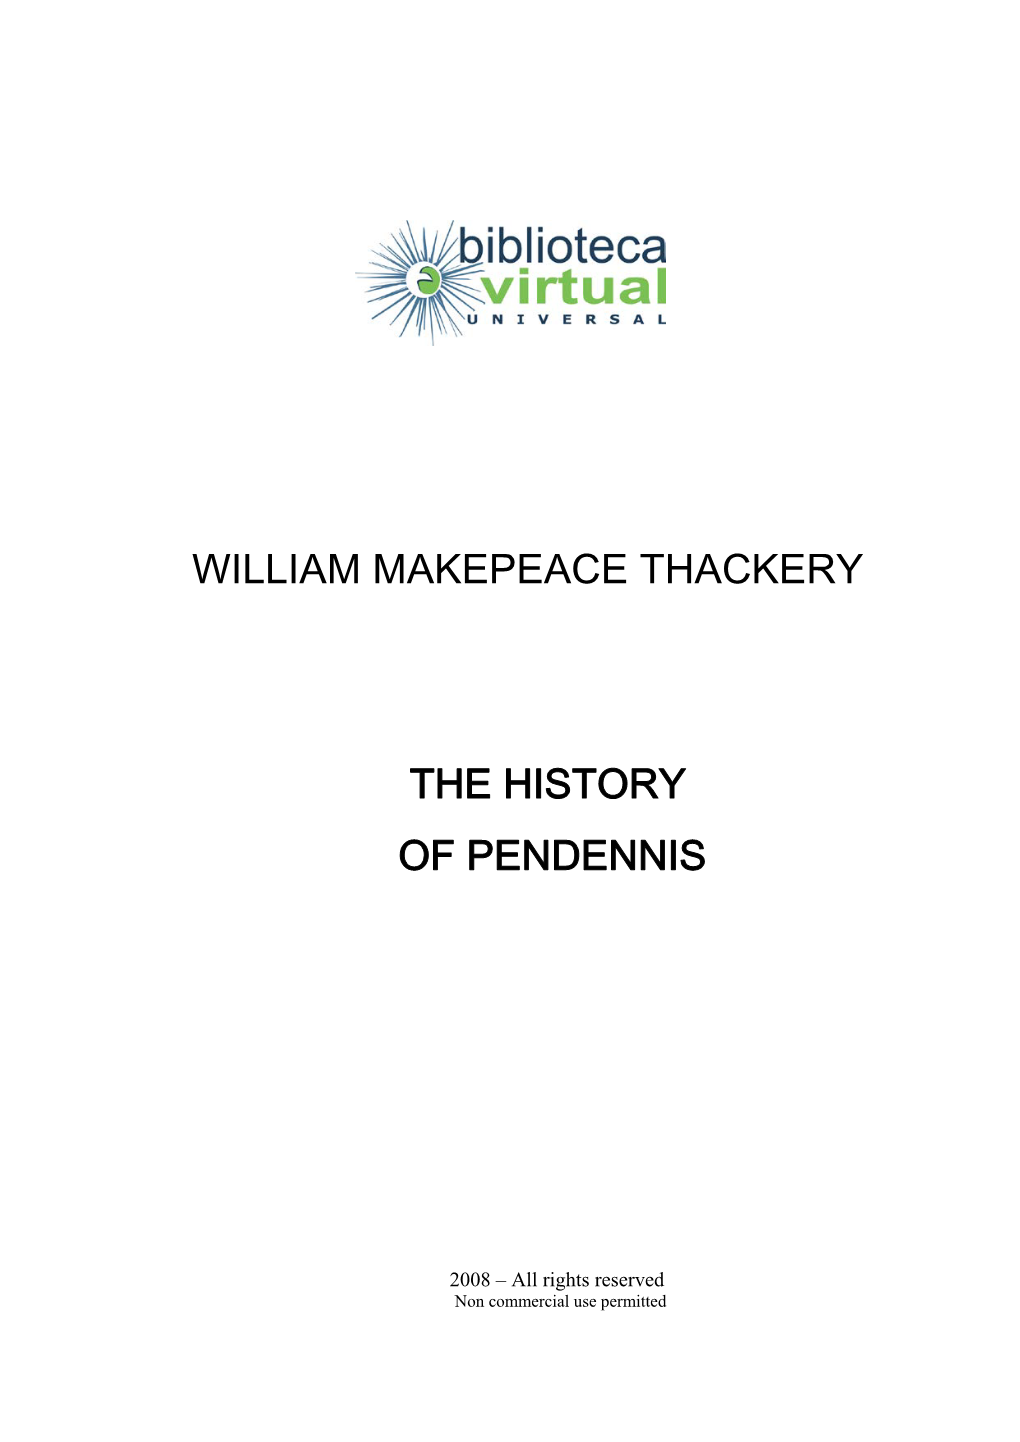 William Makepeace Thackery the History of Pendennis